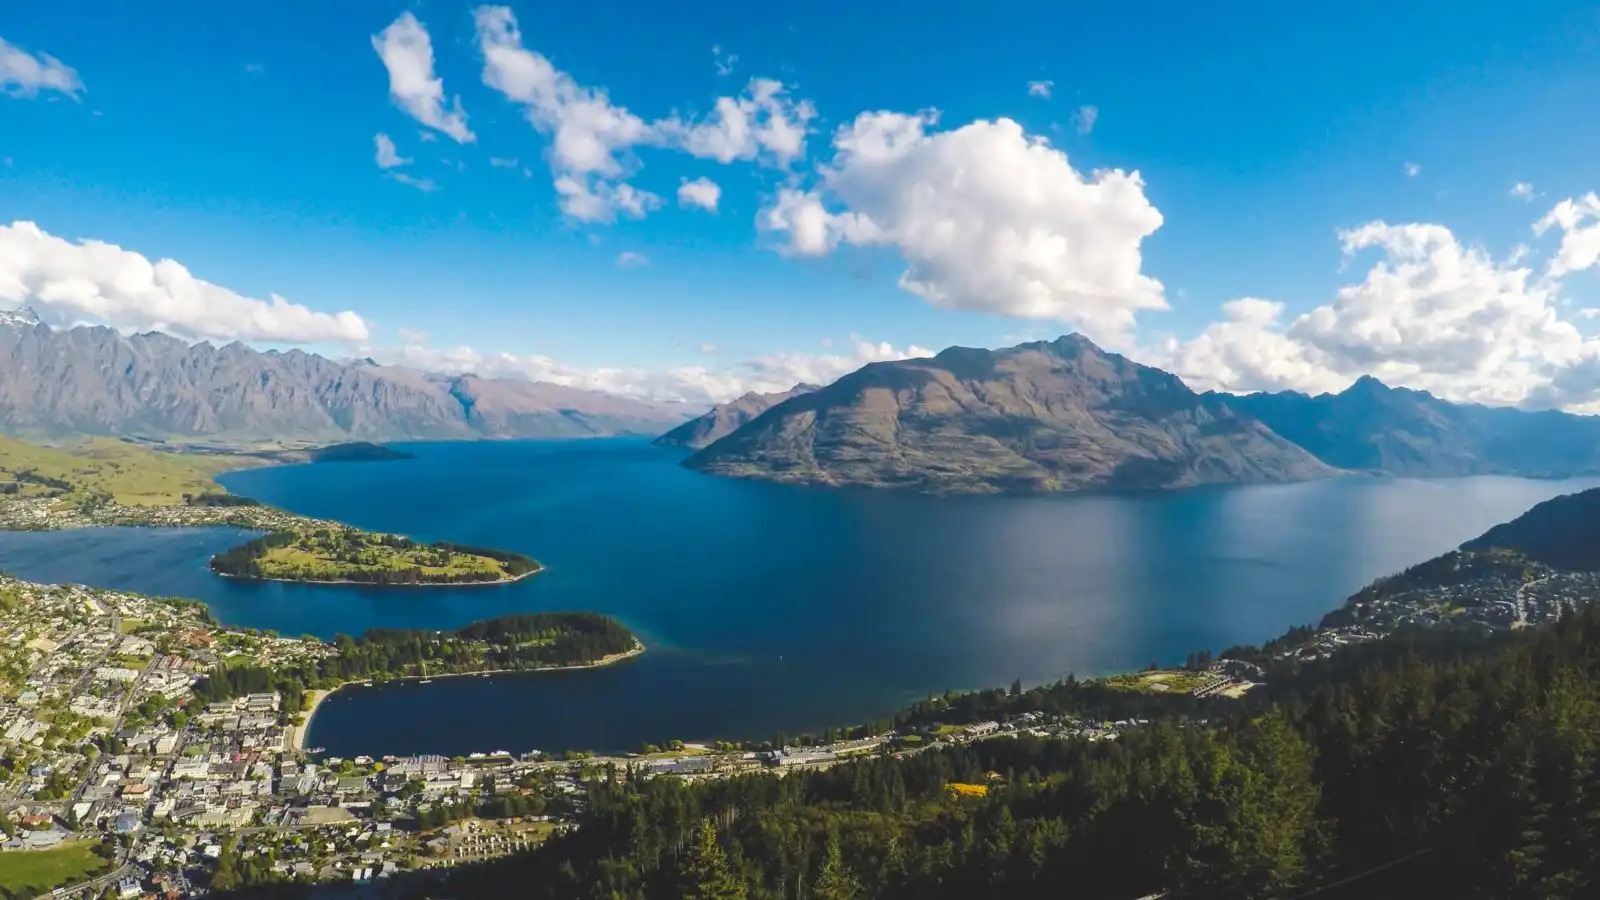 The view from Bob's Peak, Queenstown